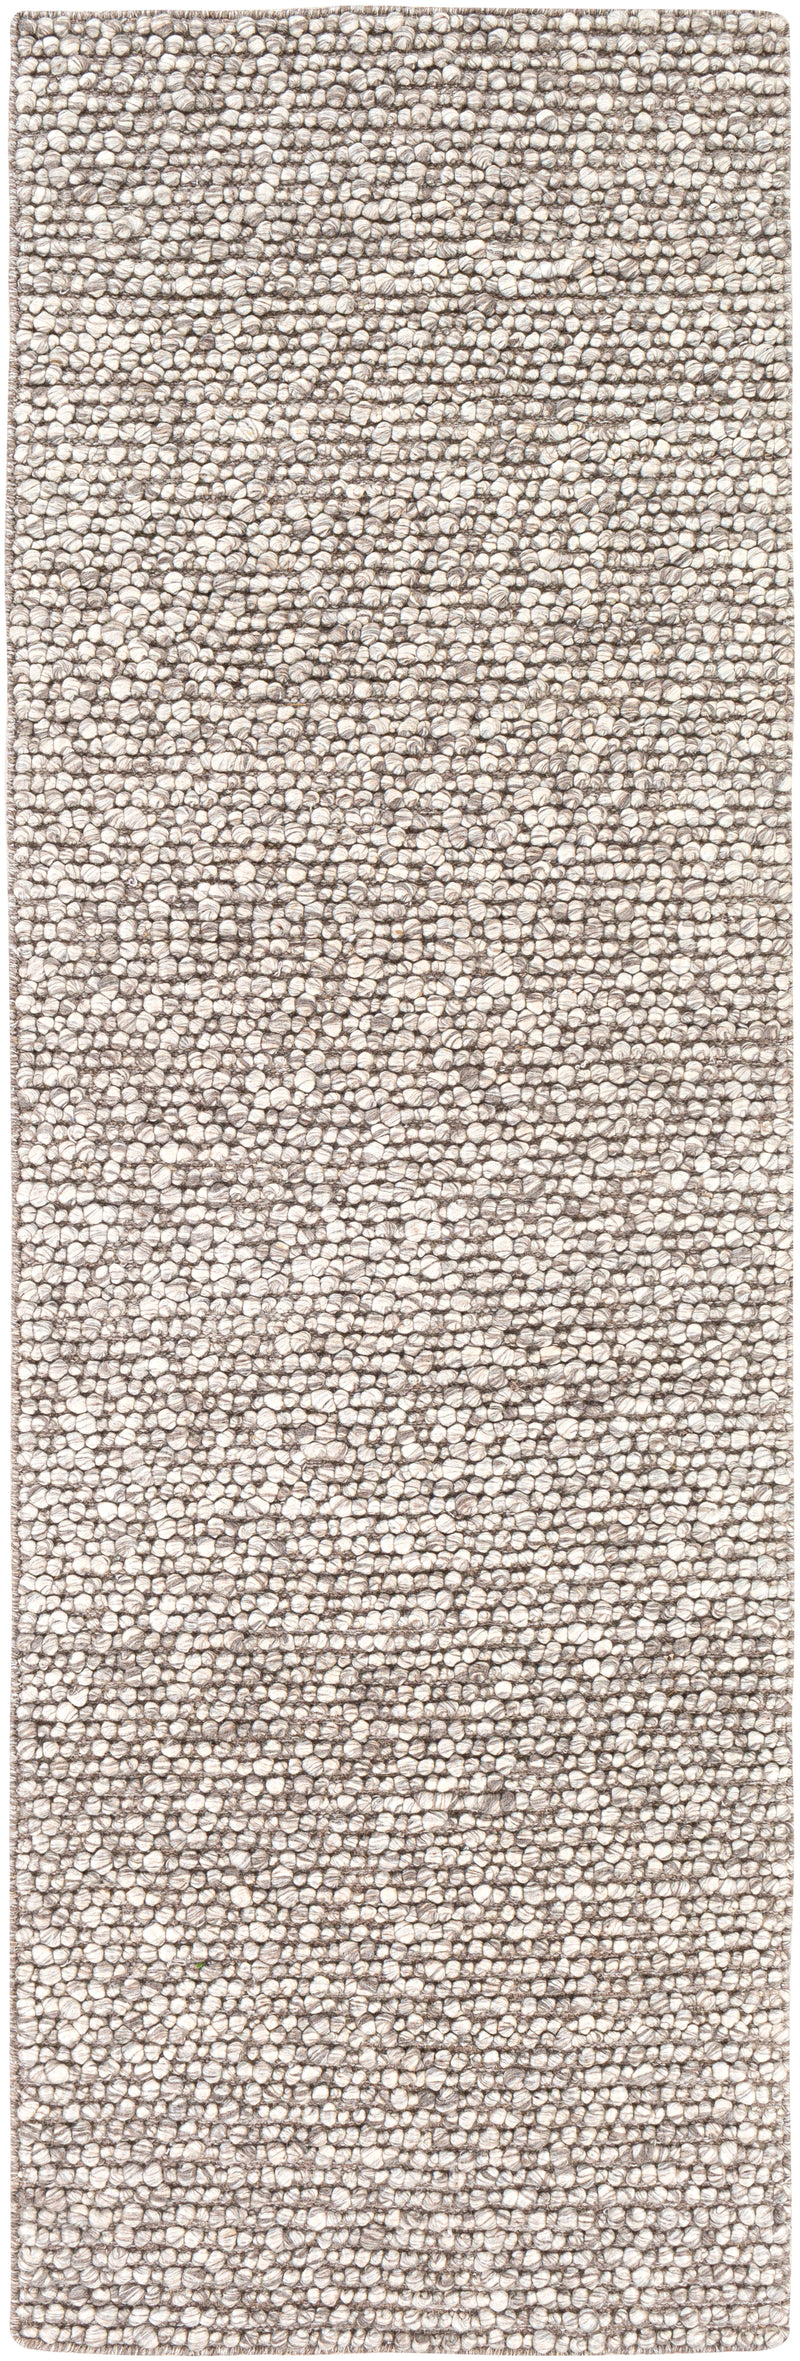 The Ambergris rug comes in both runner and area rug sizes. 